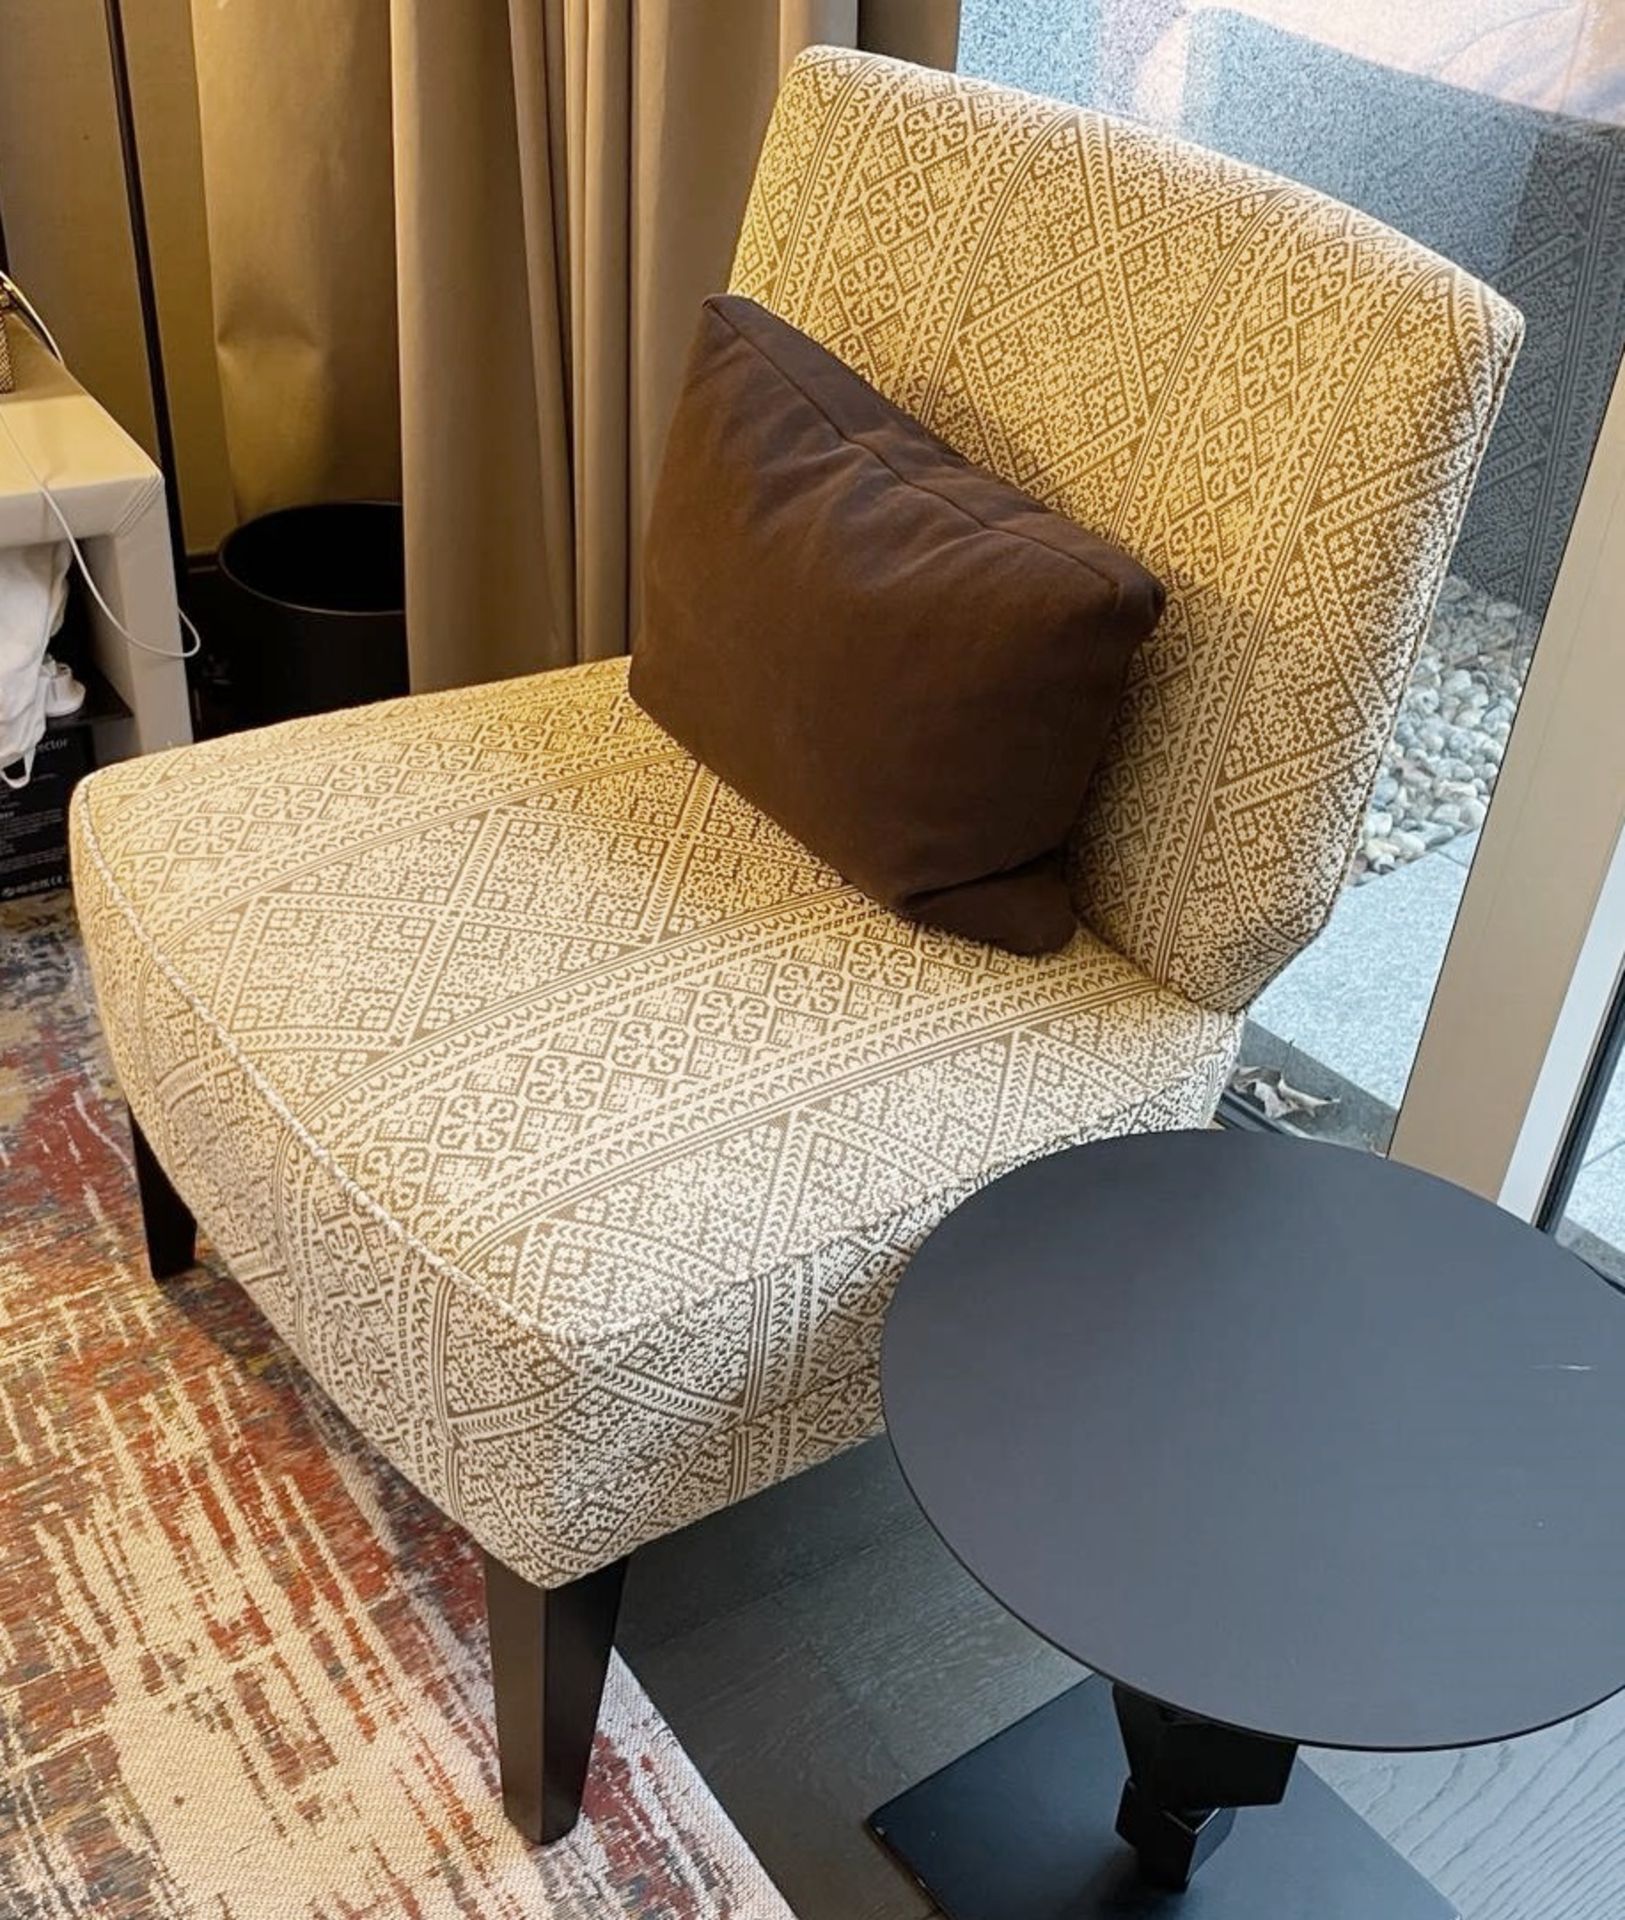 1 x Contemporary Occasional Chair Upholstered in a Premium Woven Patterned Fabric - Image 3 of 7